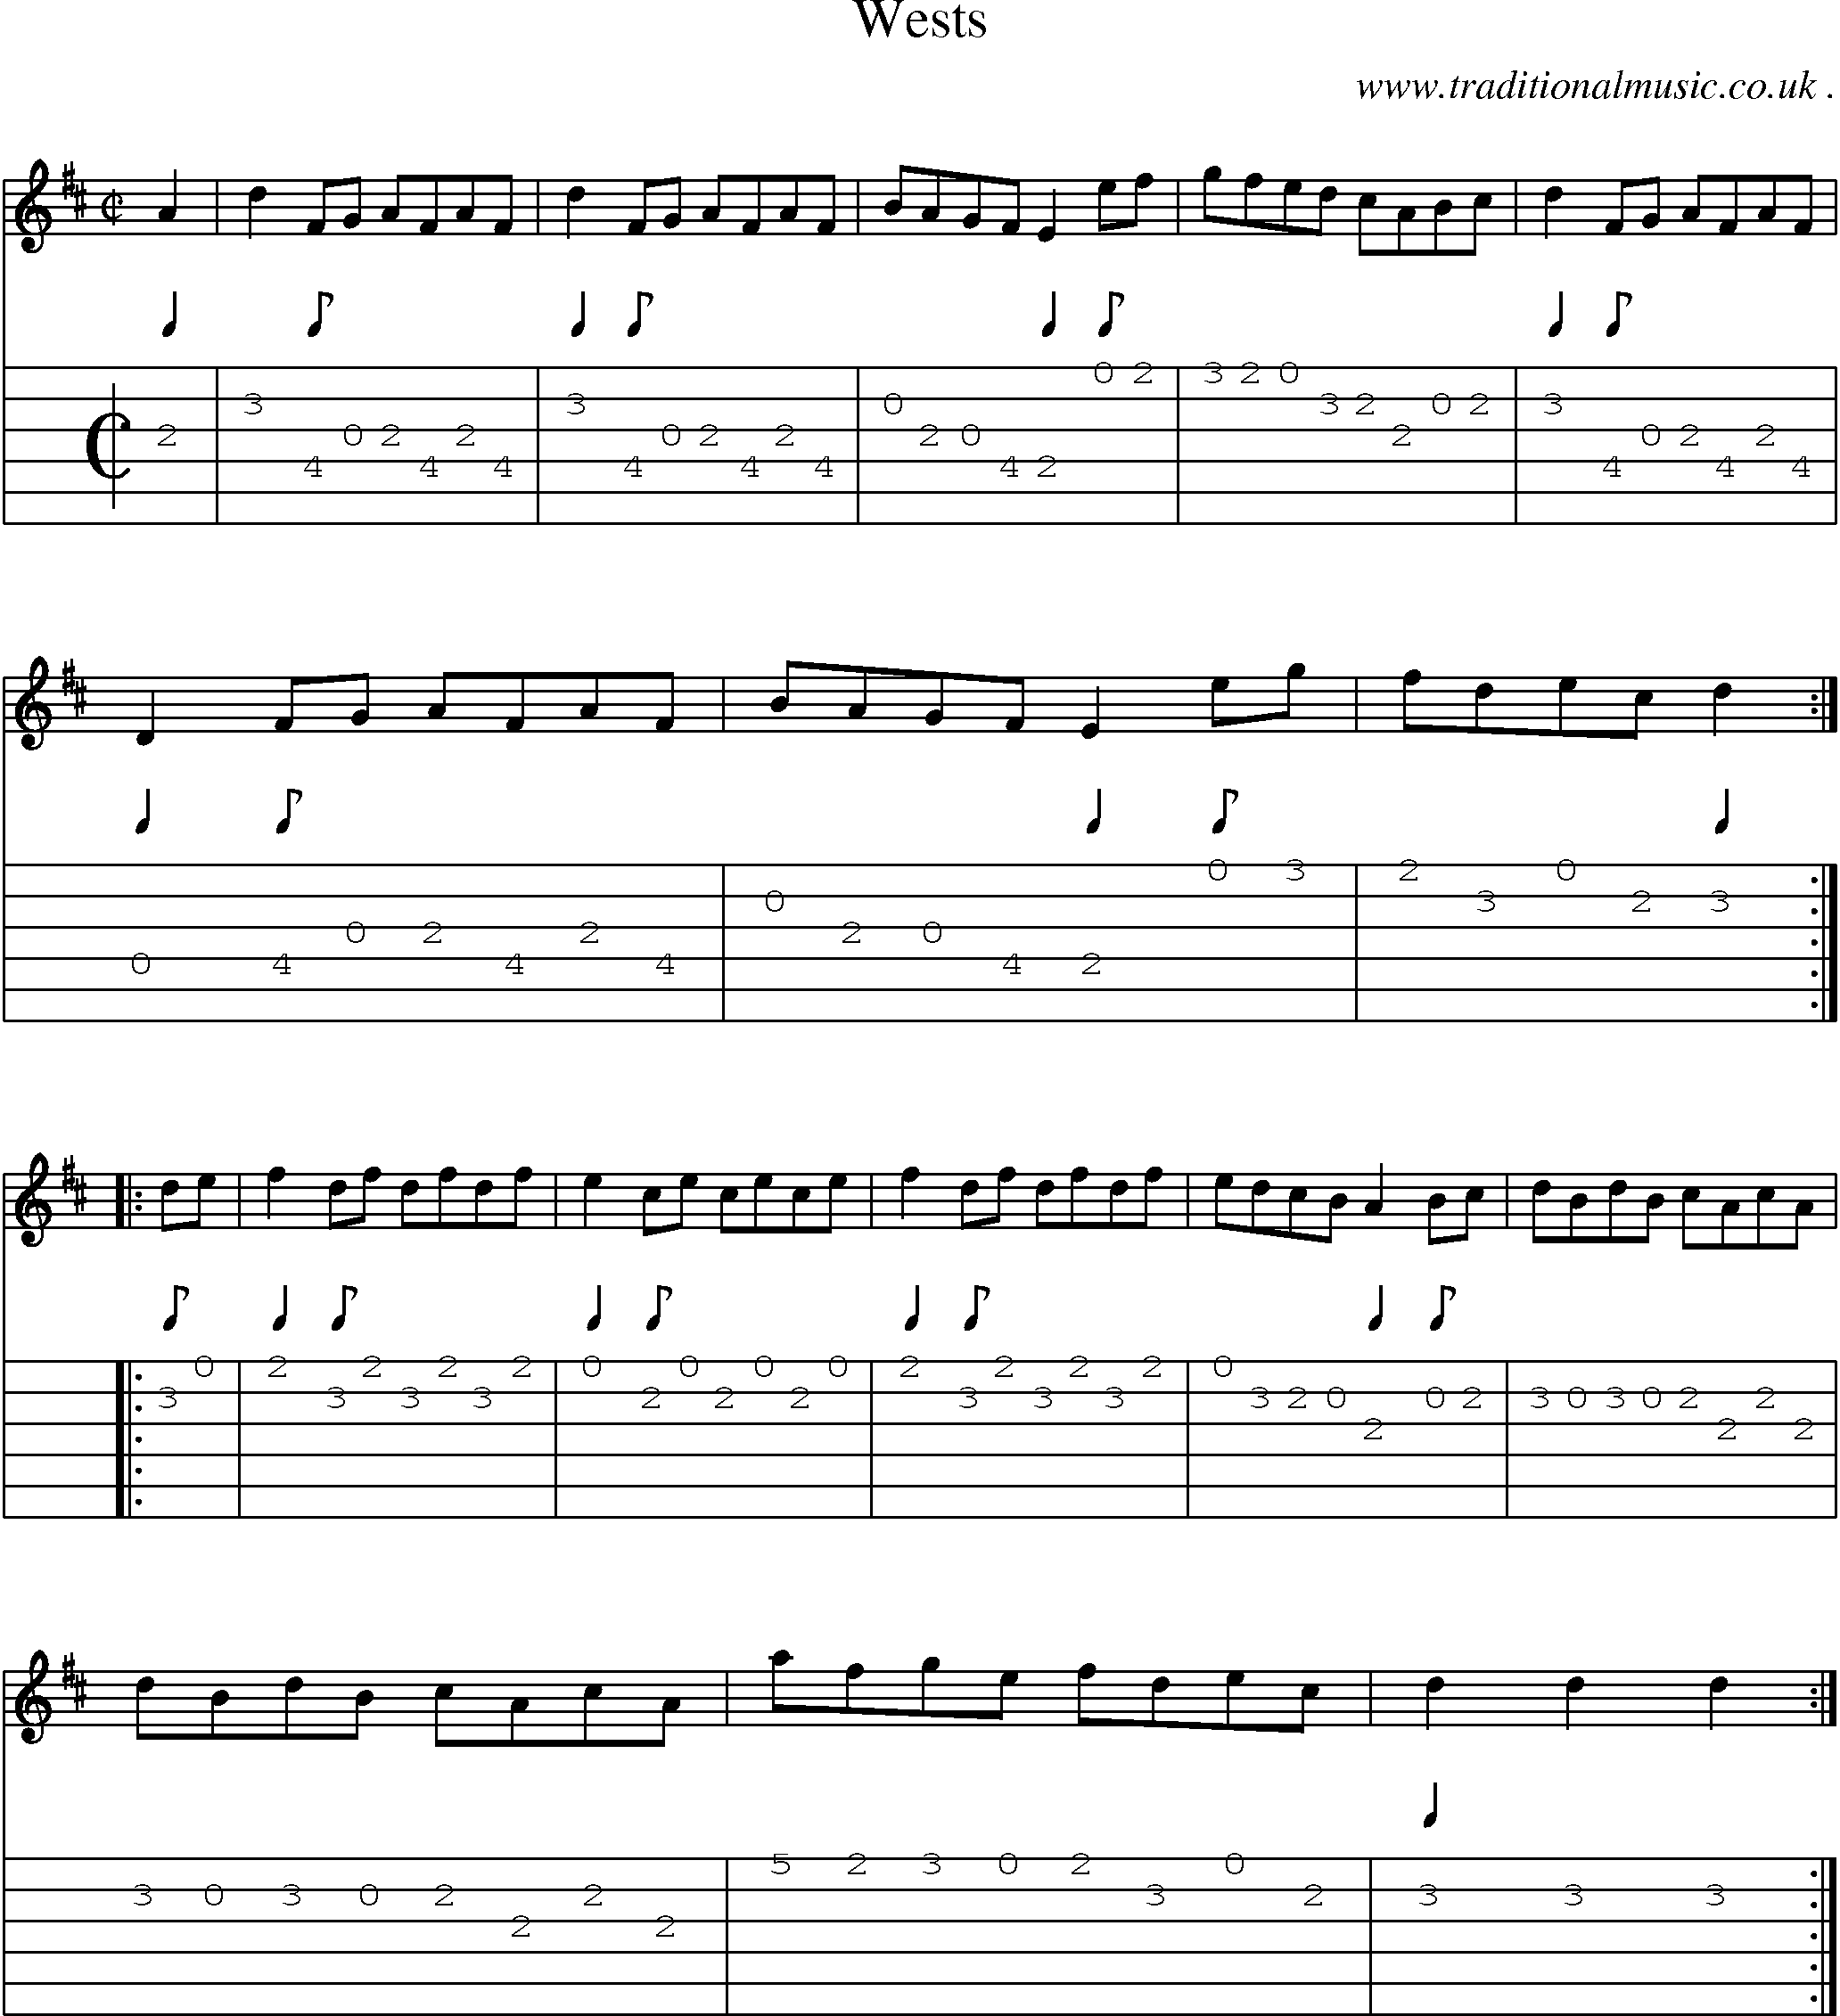 Sheet-music  score, Chords and Guitar Tabs for Wests